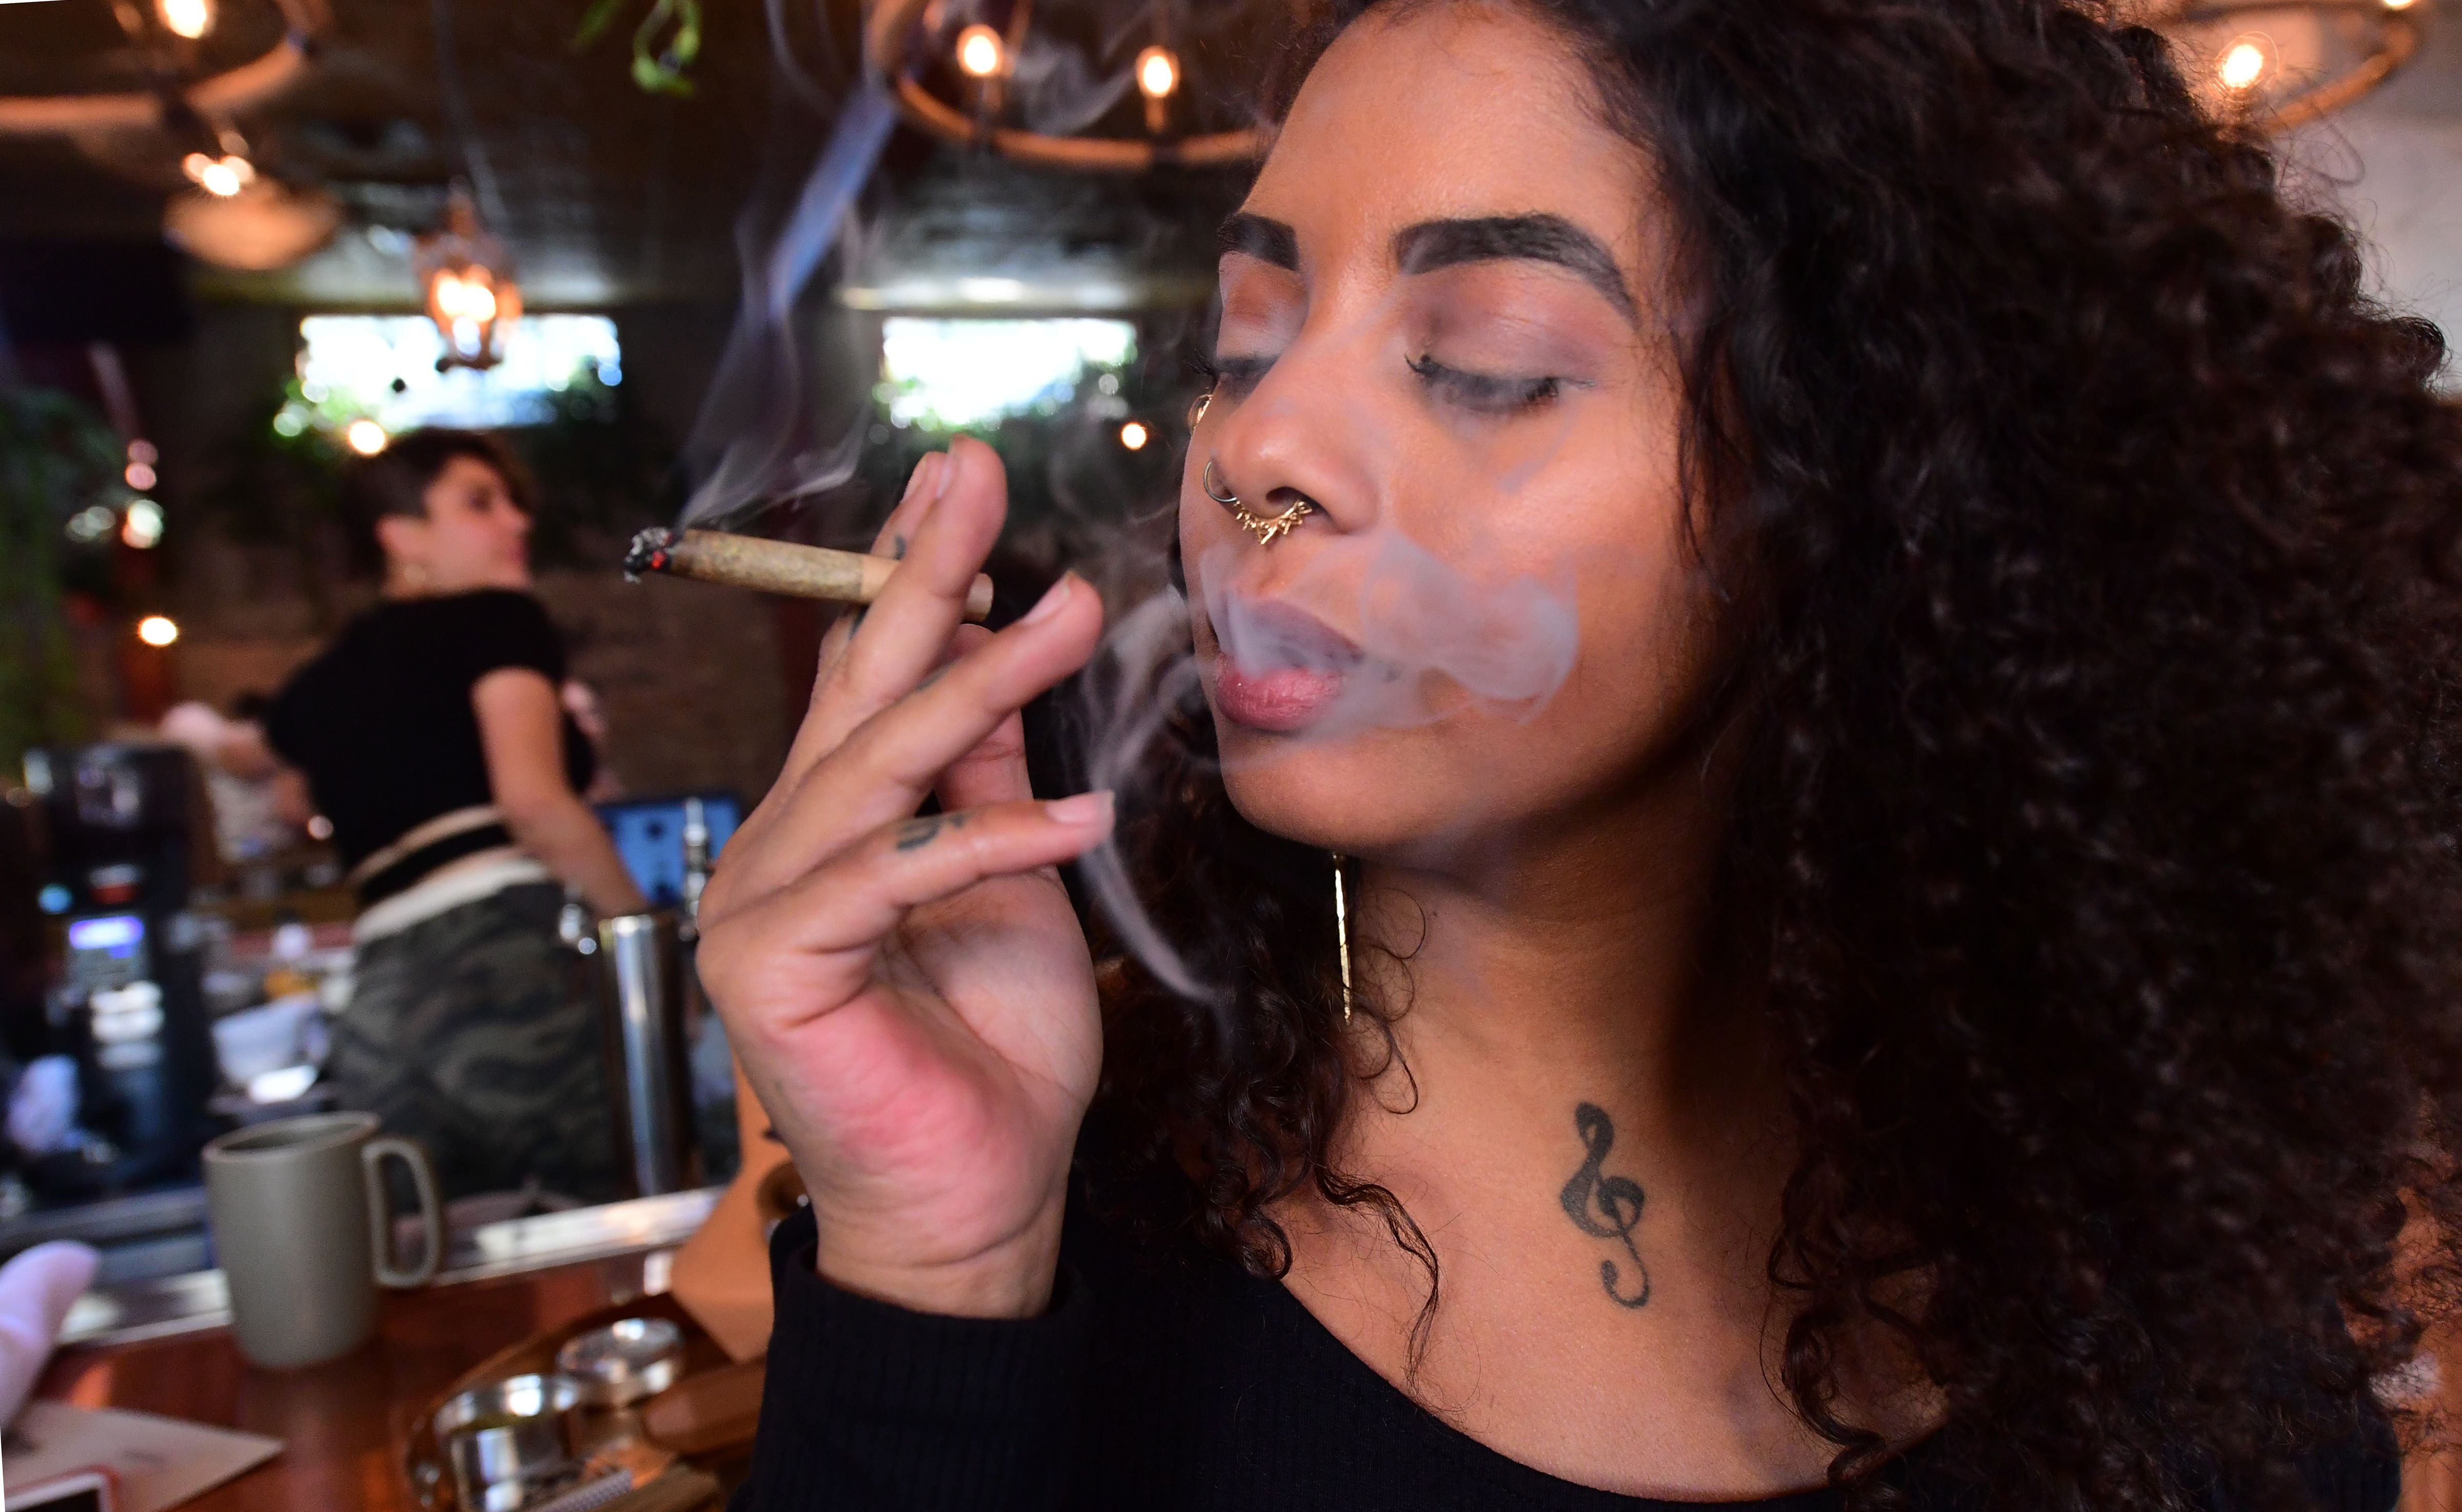 Last September the Lowell Cafe in West Hollywood, California, became America’s first cannabis restaurant, offering diners an array of weed products and hoping to rival Amsterdam’s famed coffee shops